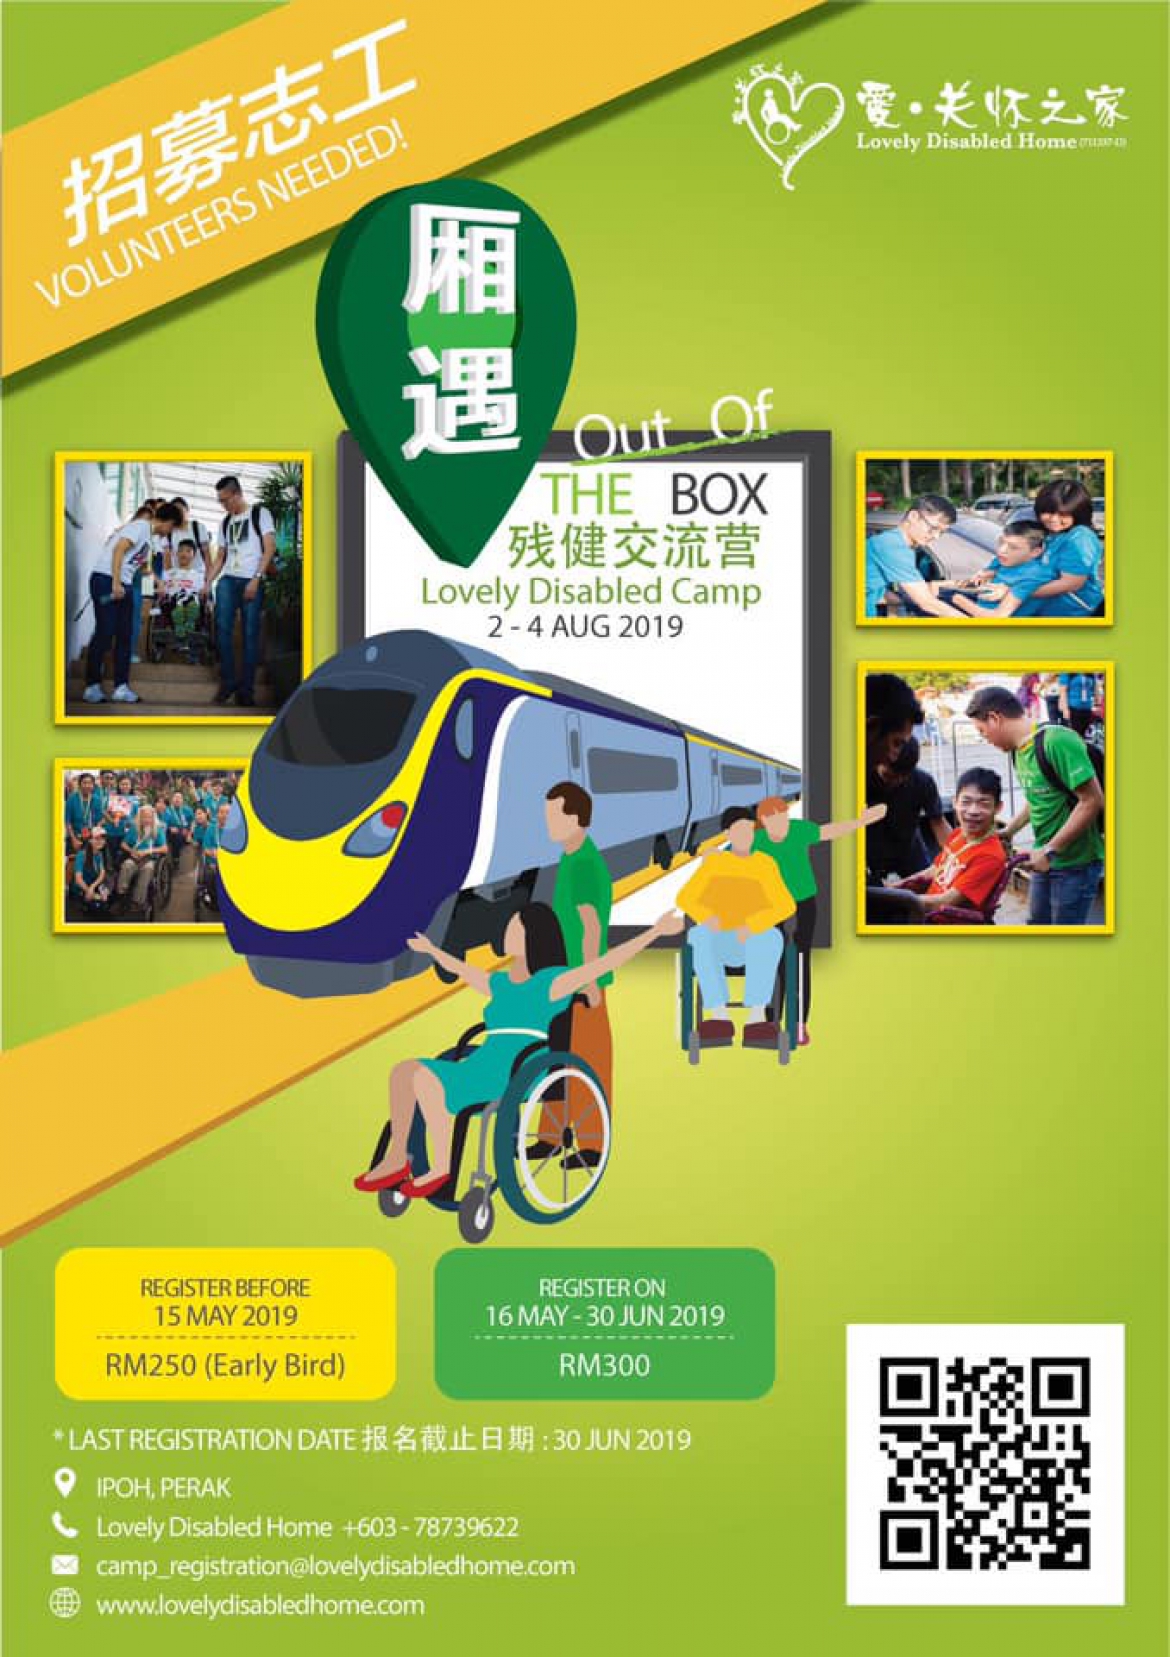 “Out Of The Box” Lovely Disabled Camp 2019